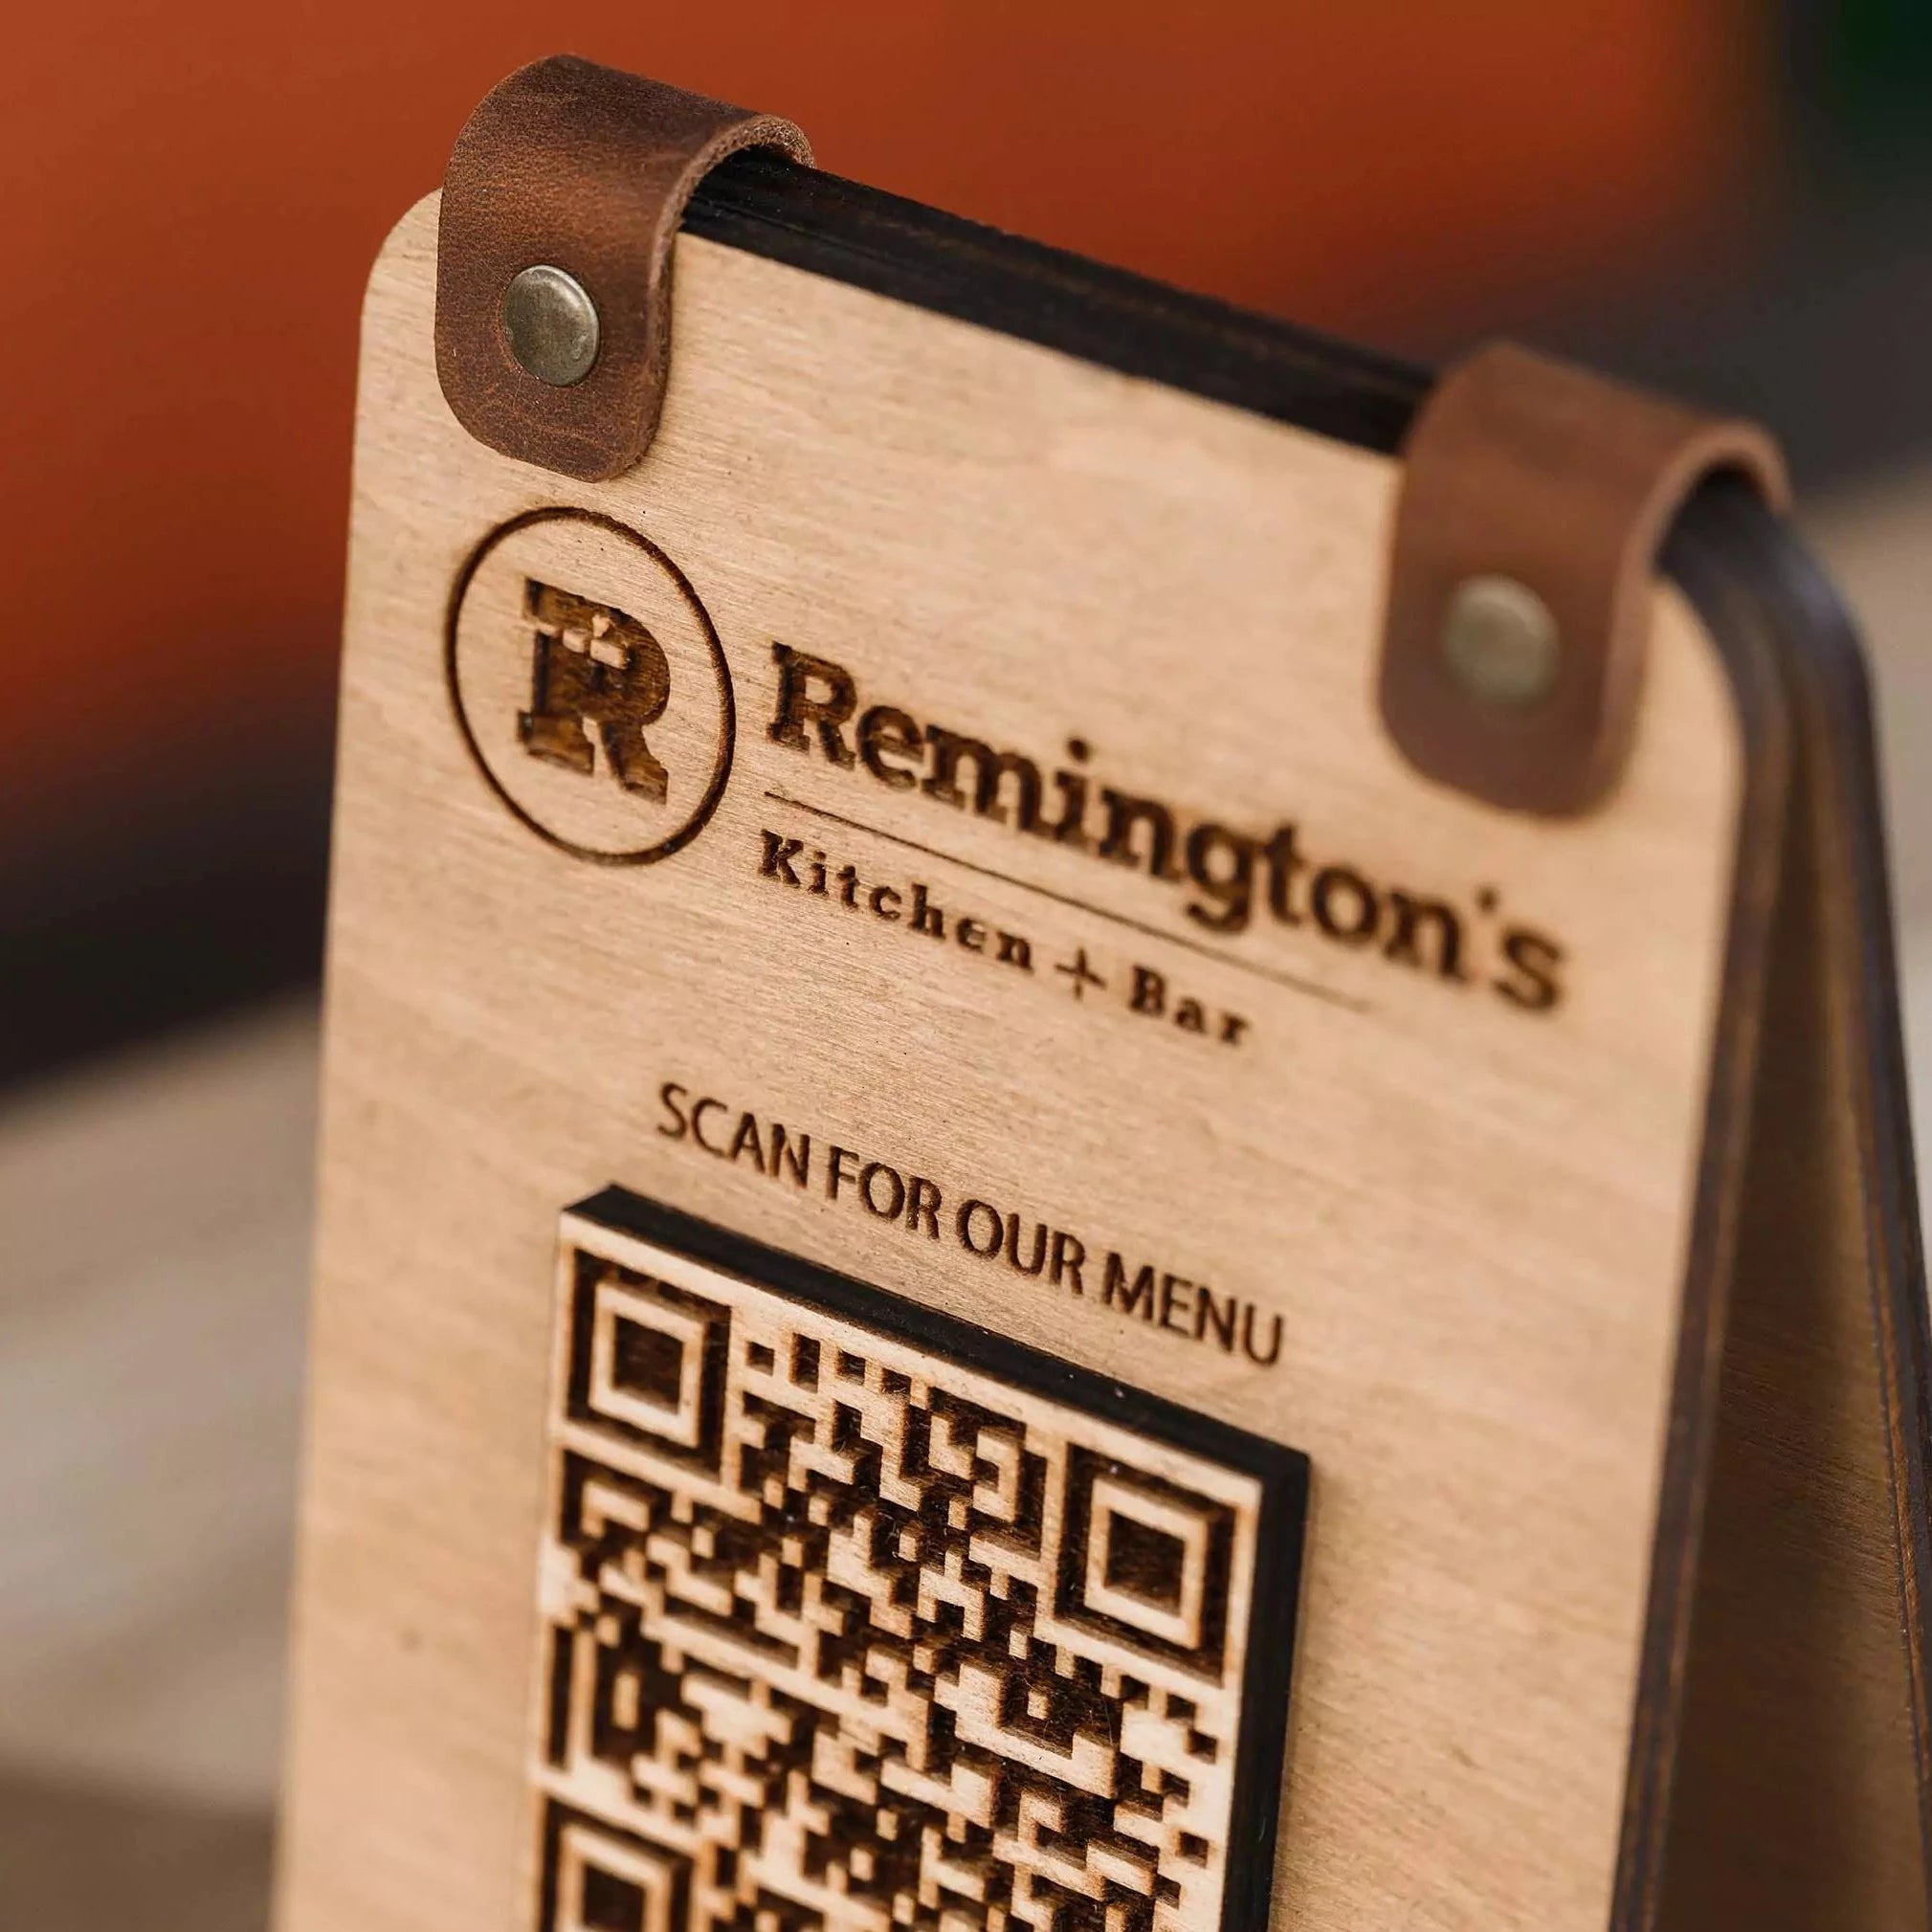 Stylish QR Code Menu Stand for restaurants. Scan to pay sign for easy access to menus and payments, ideal for contemporary dining.